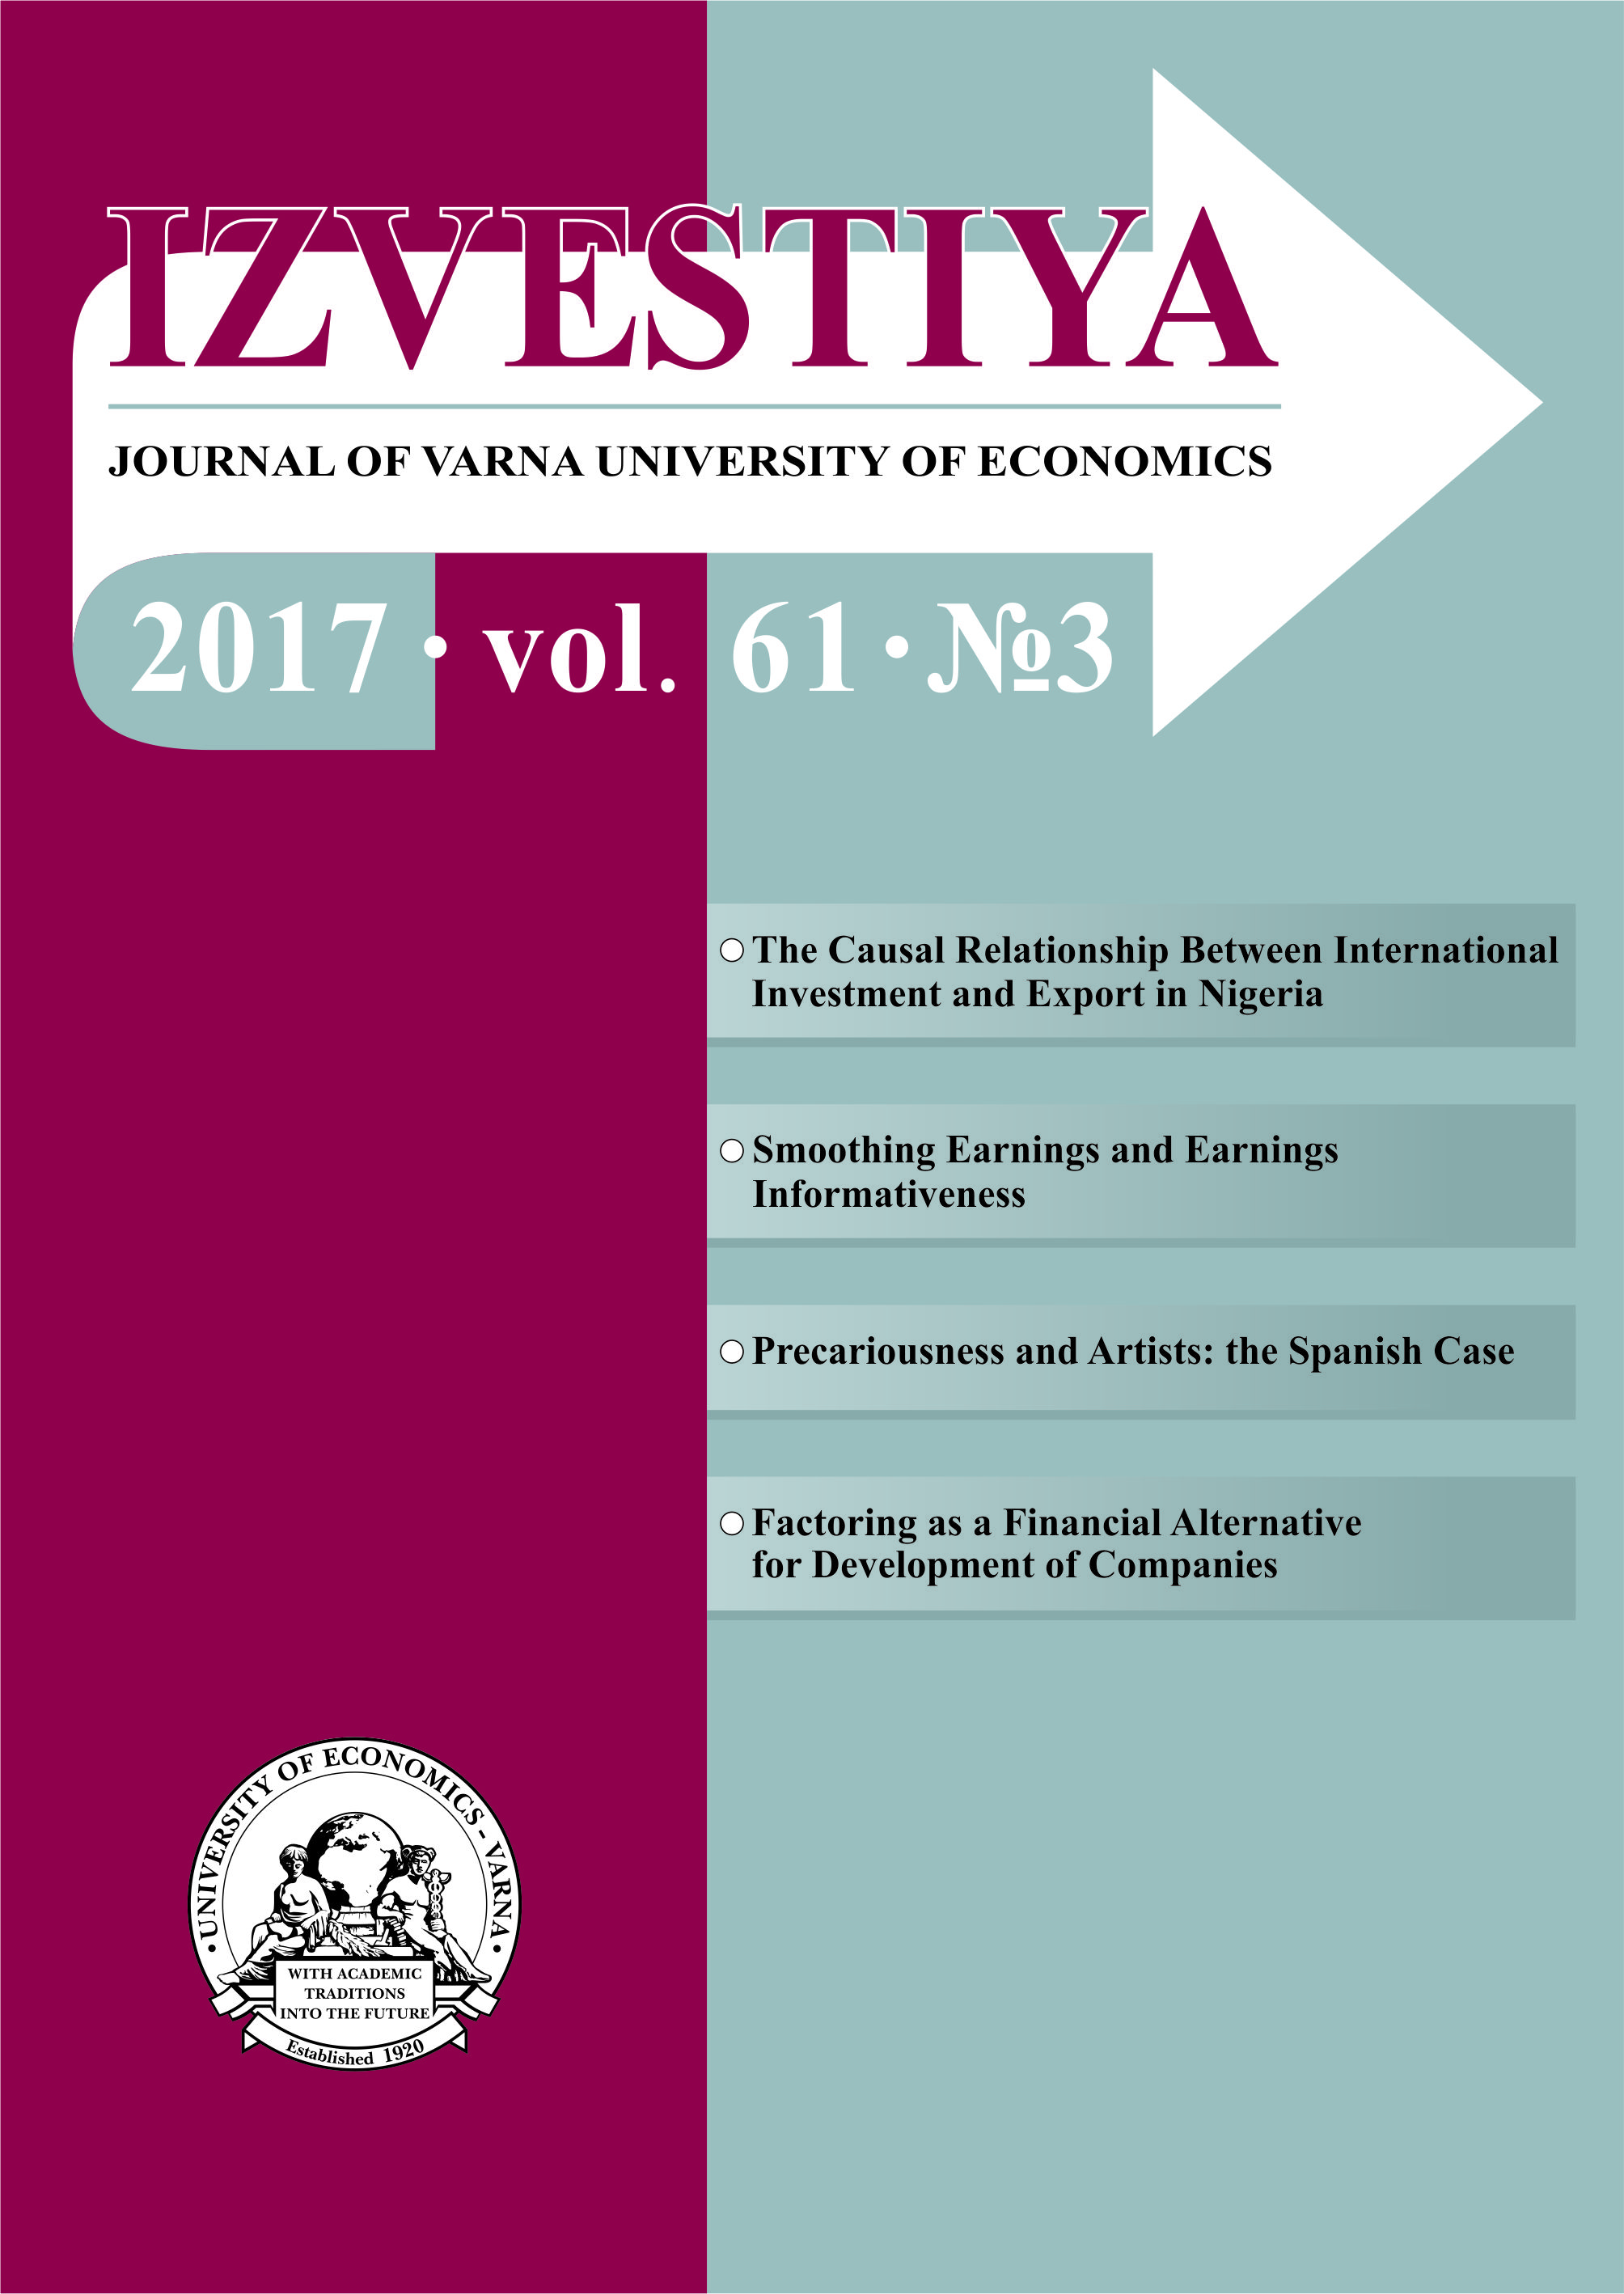 Factoring as a Financial Alternative aor Development of Companies: Evidence from Bulgaria Cover Image